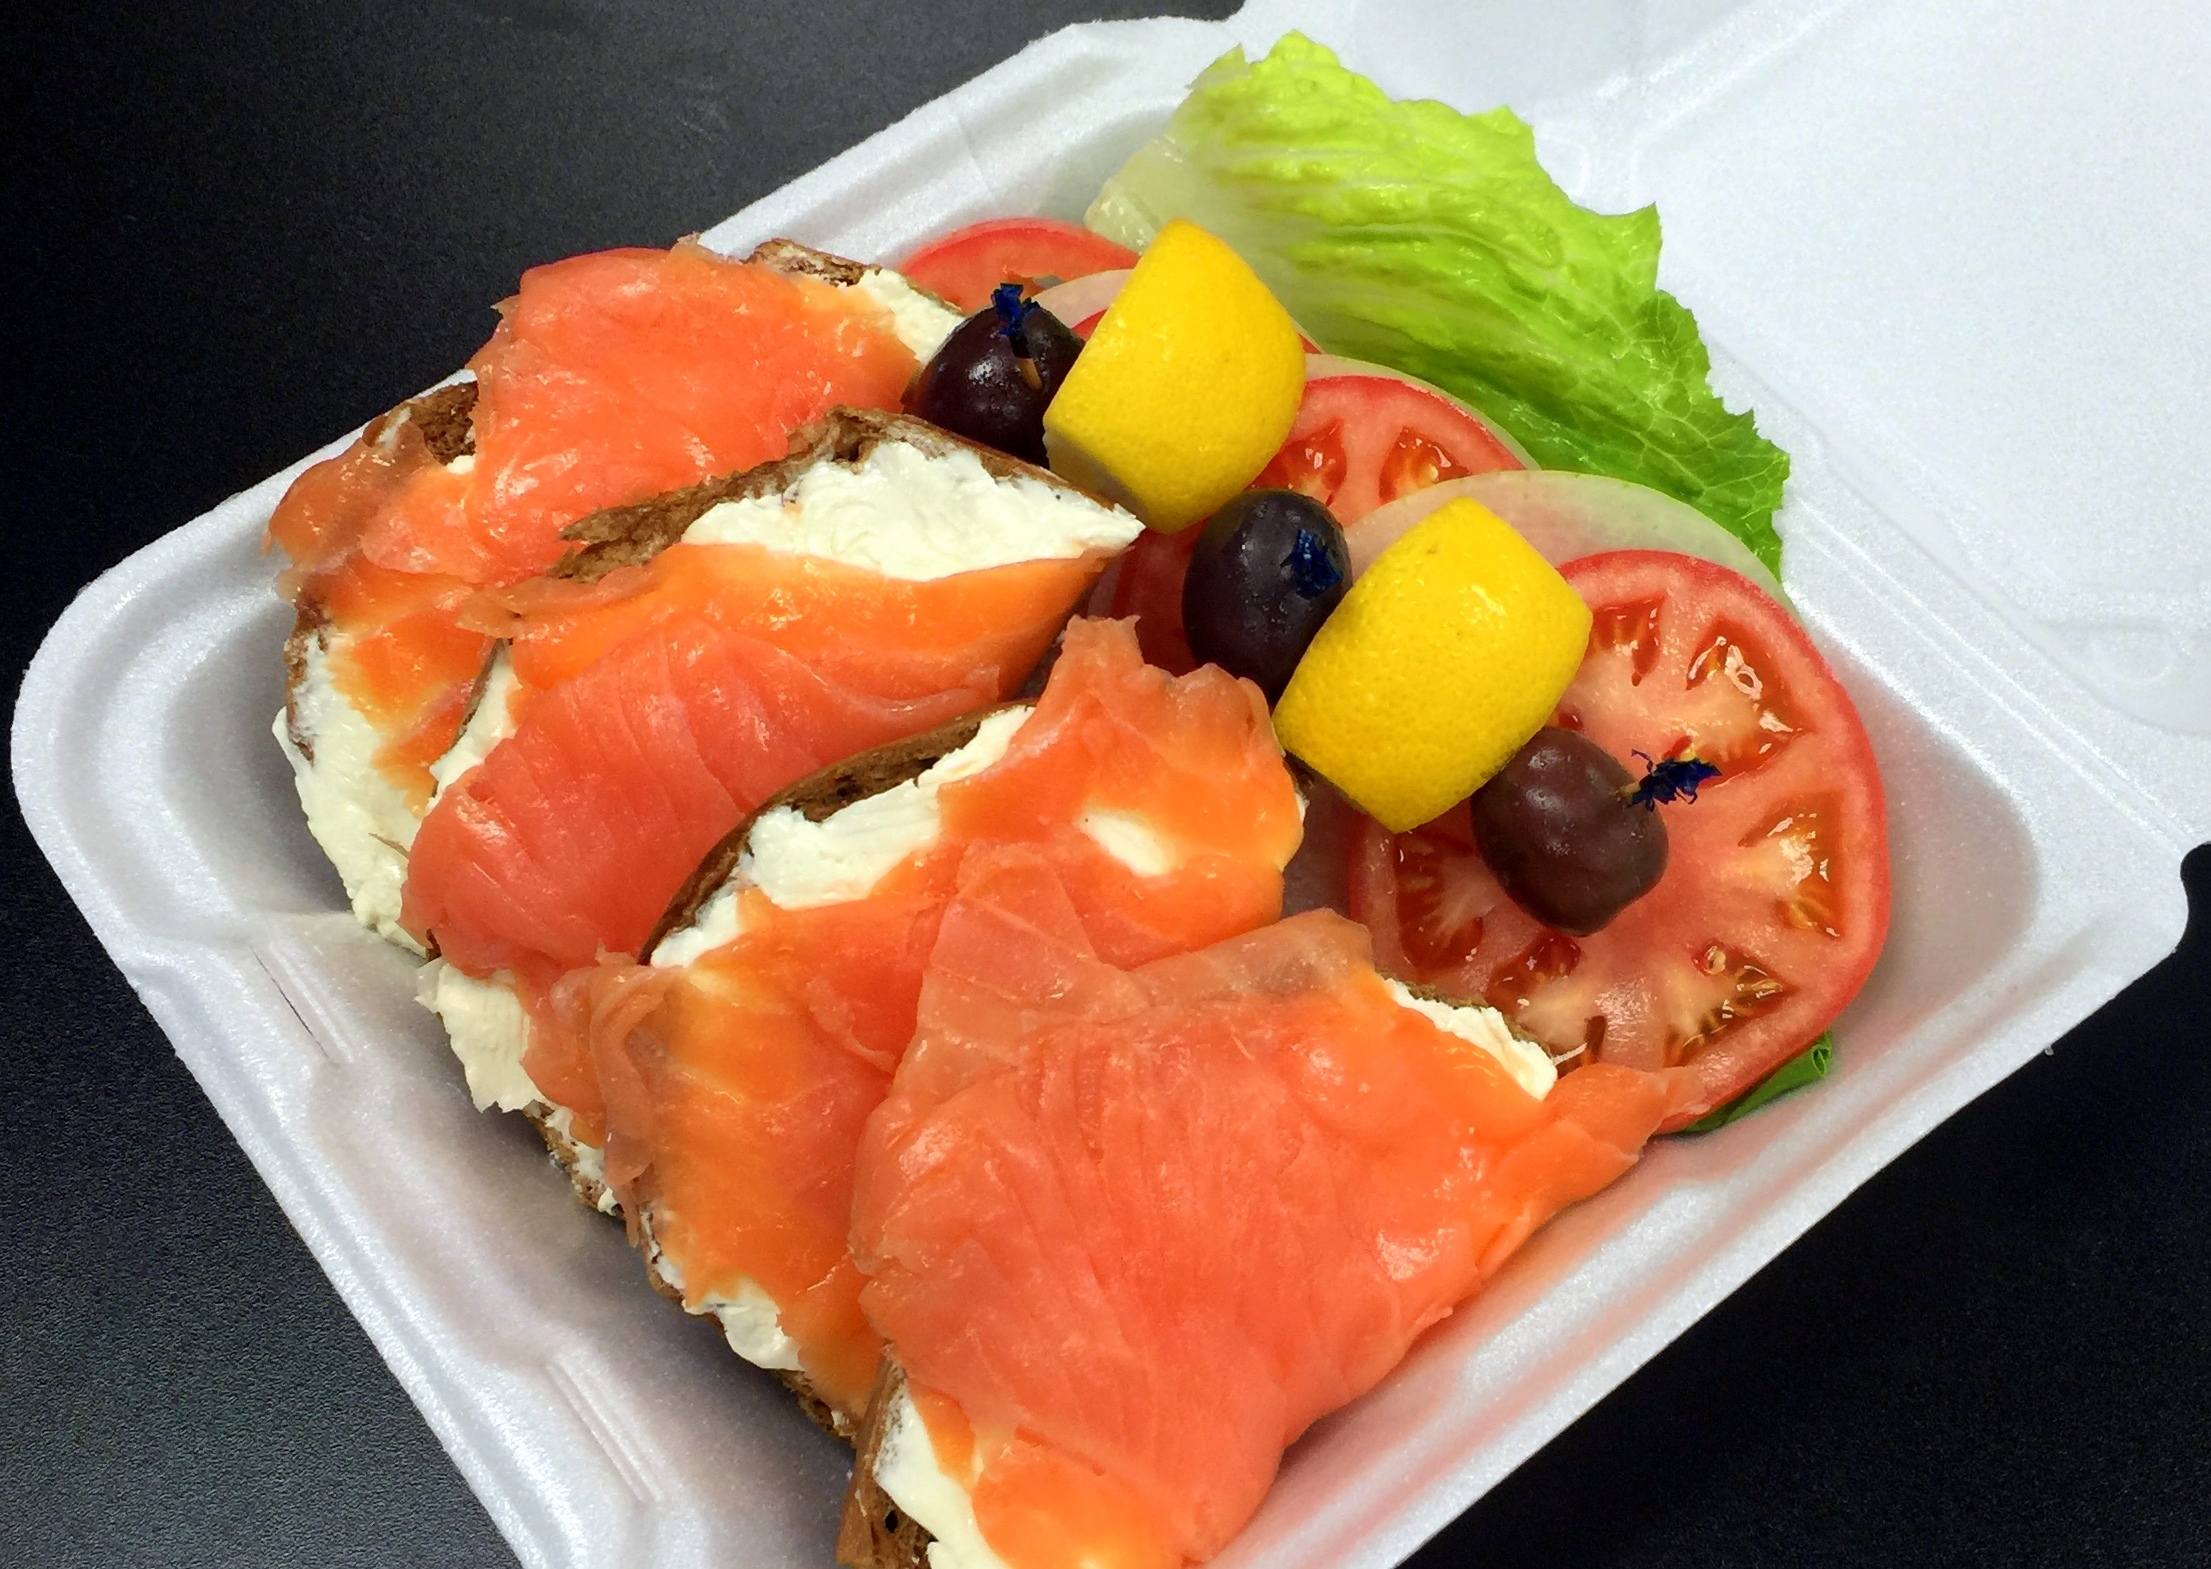 mmmm, lox on a bagel with cream cheese